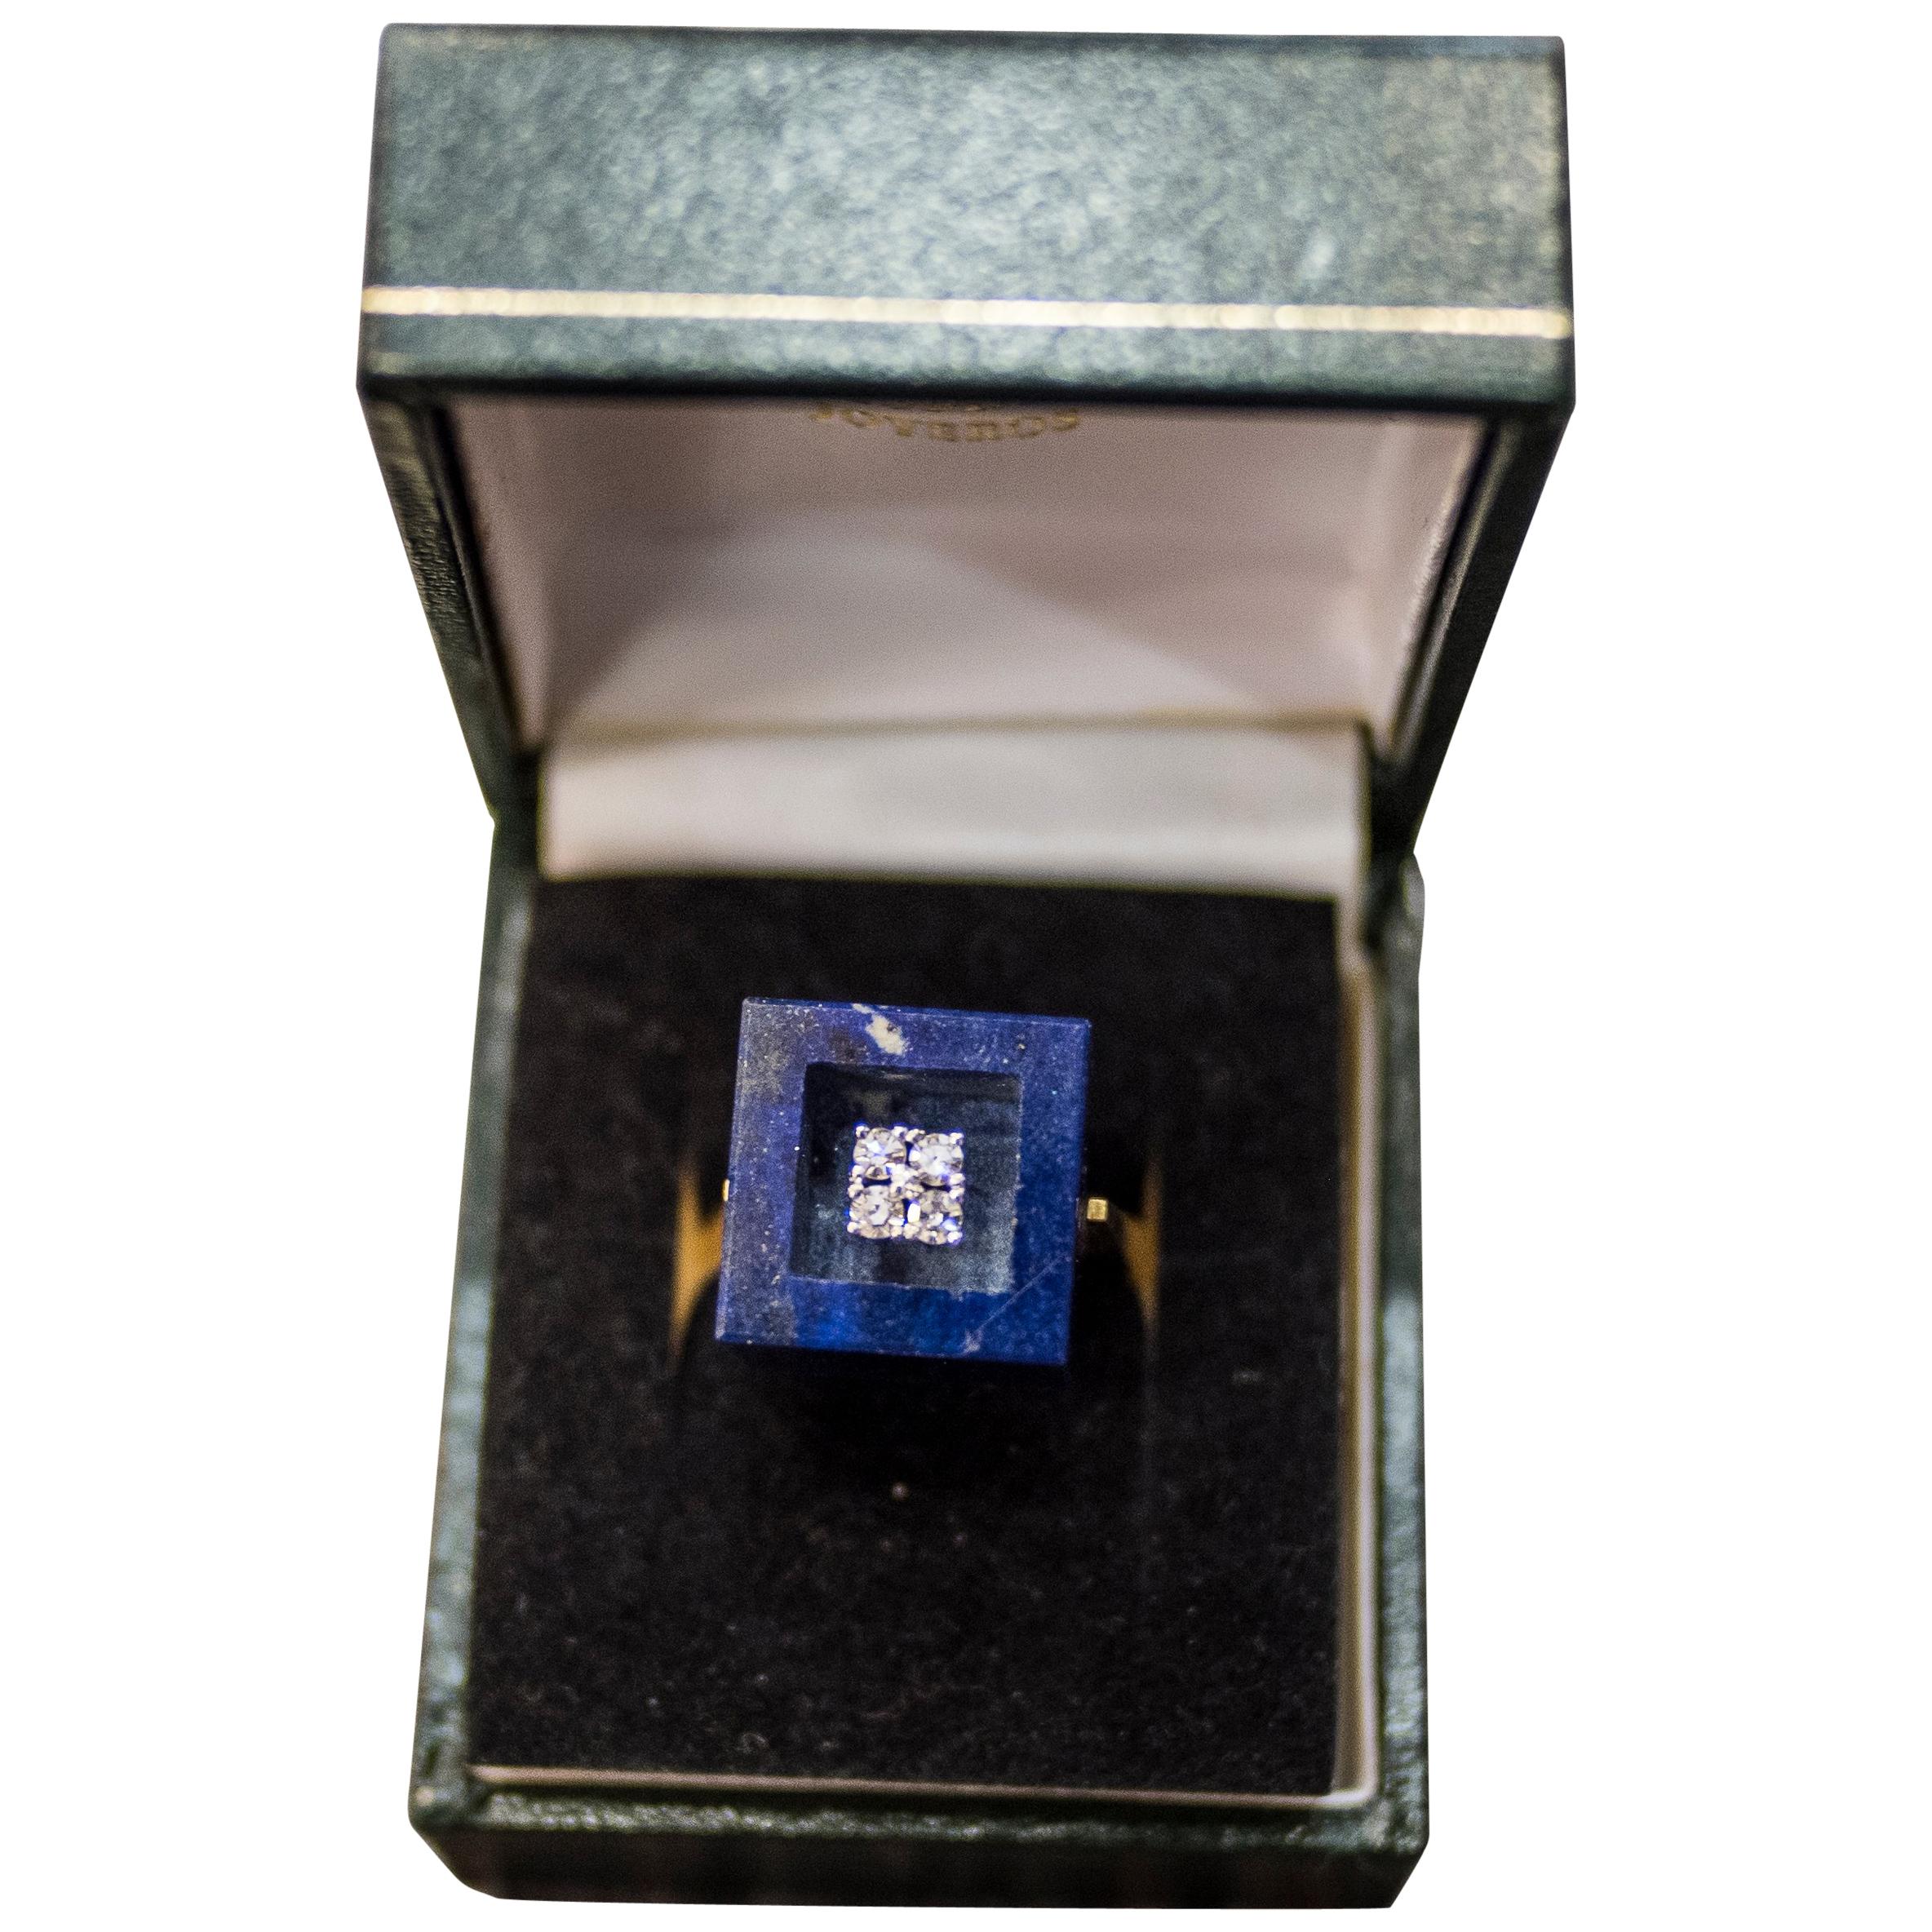 1970s French Yellow Gold Ring with Lapislazul Stone in Cube Shape and 4 Diamonds